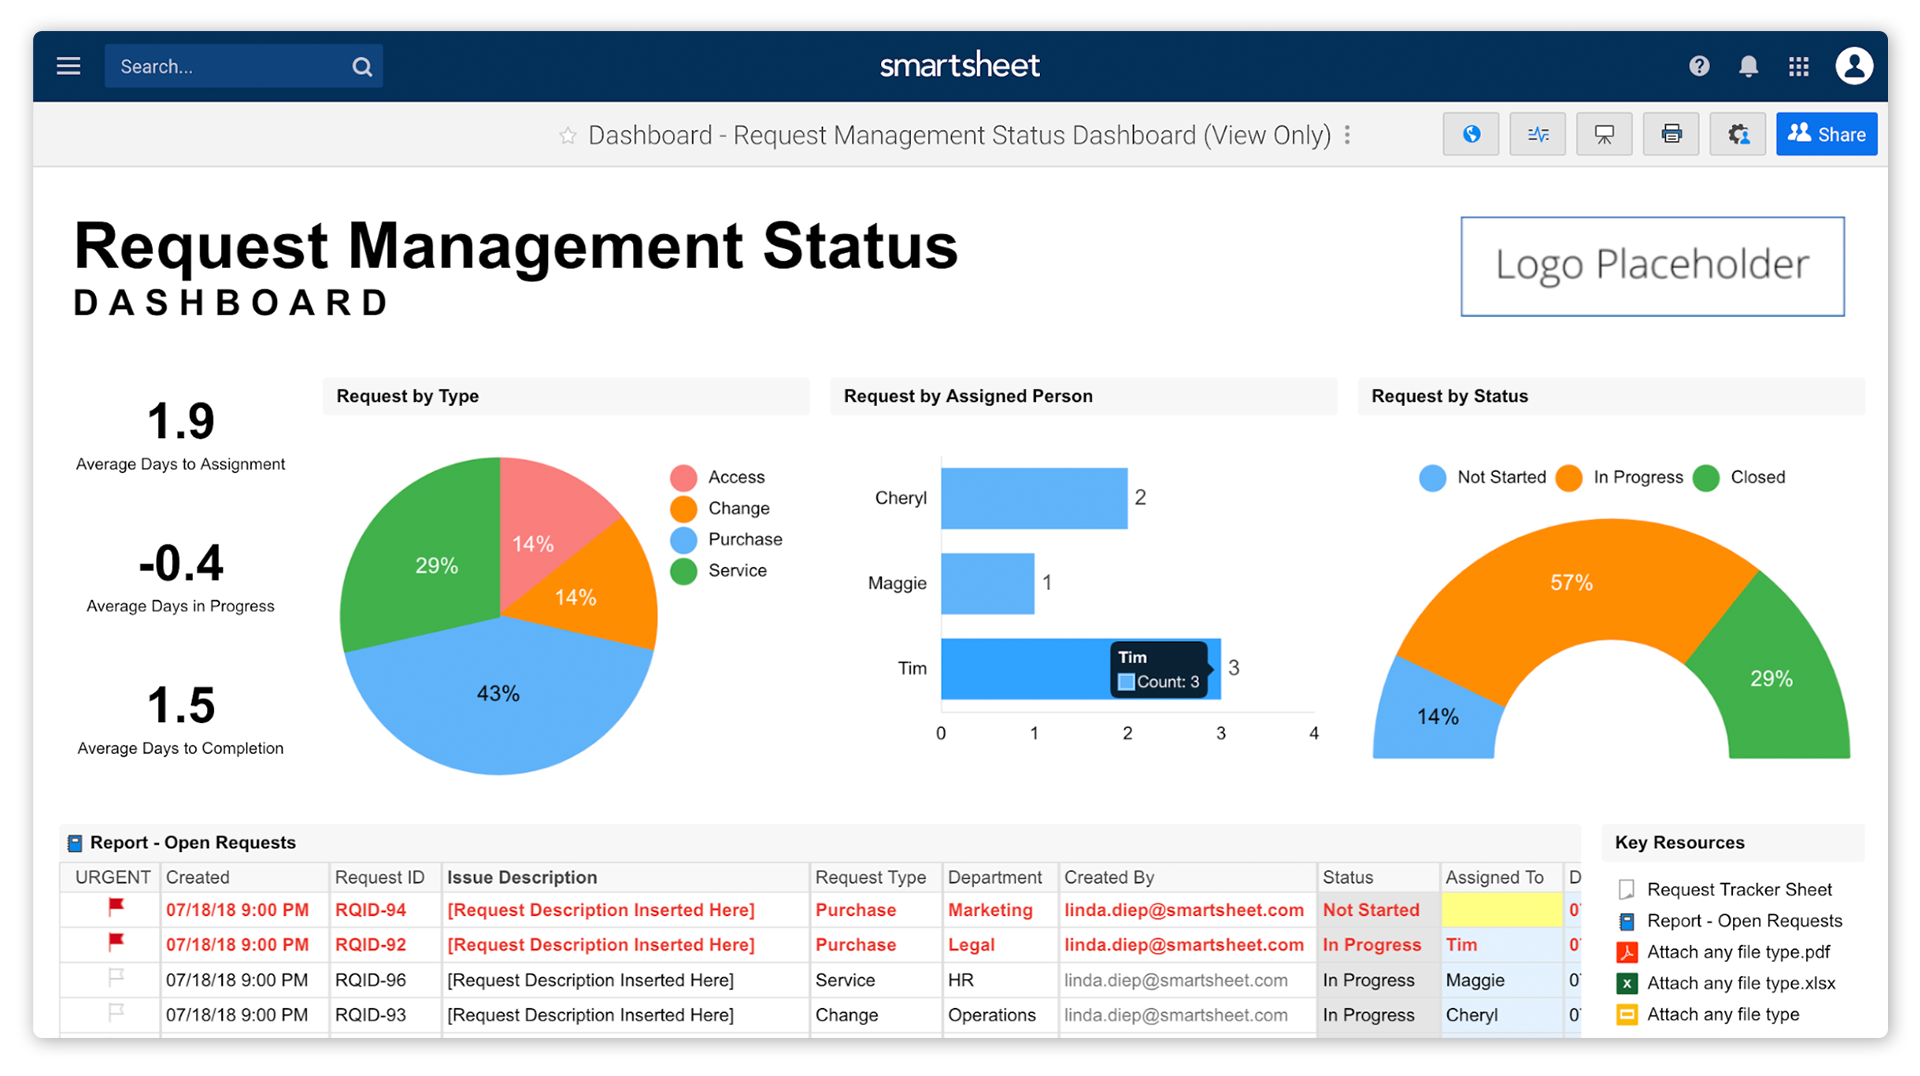 A Smartsheet dashboard illustrates the status of key requests, including a pie chart showing requests by type, a bar chart showing request owners by count, and a report listing recent requests